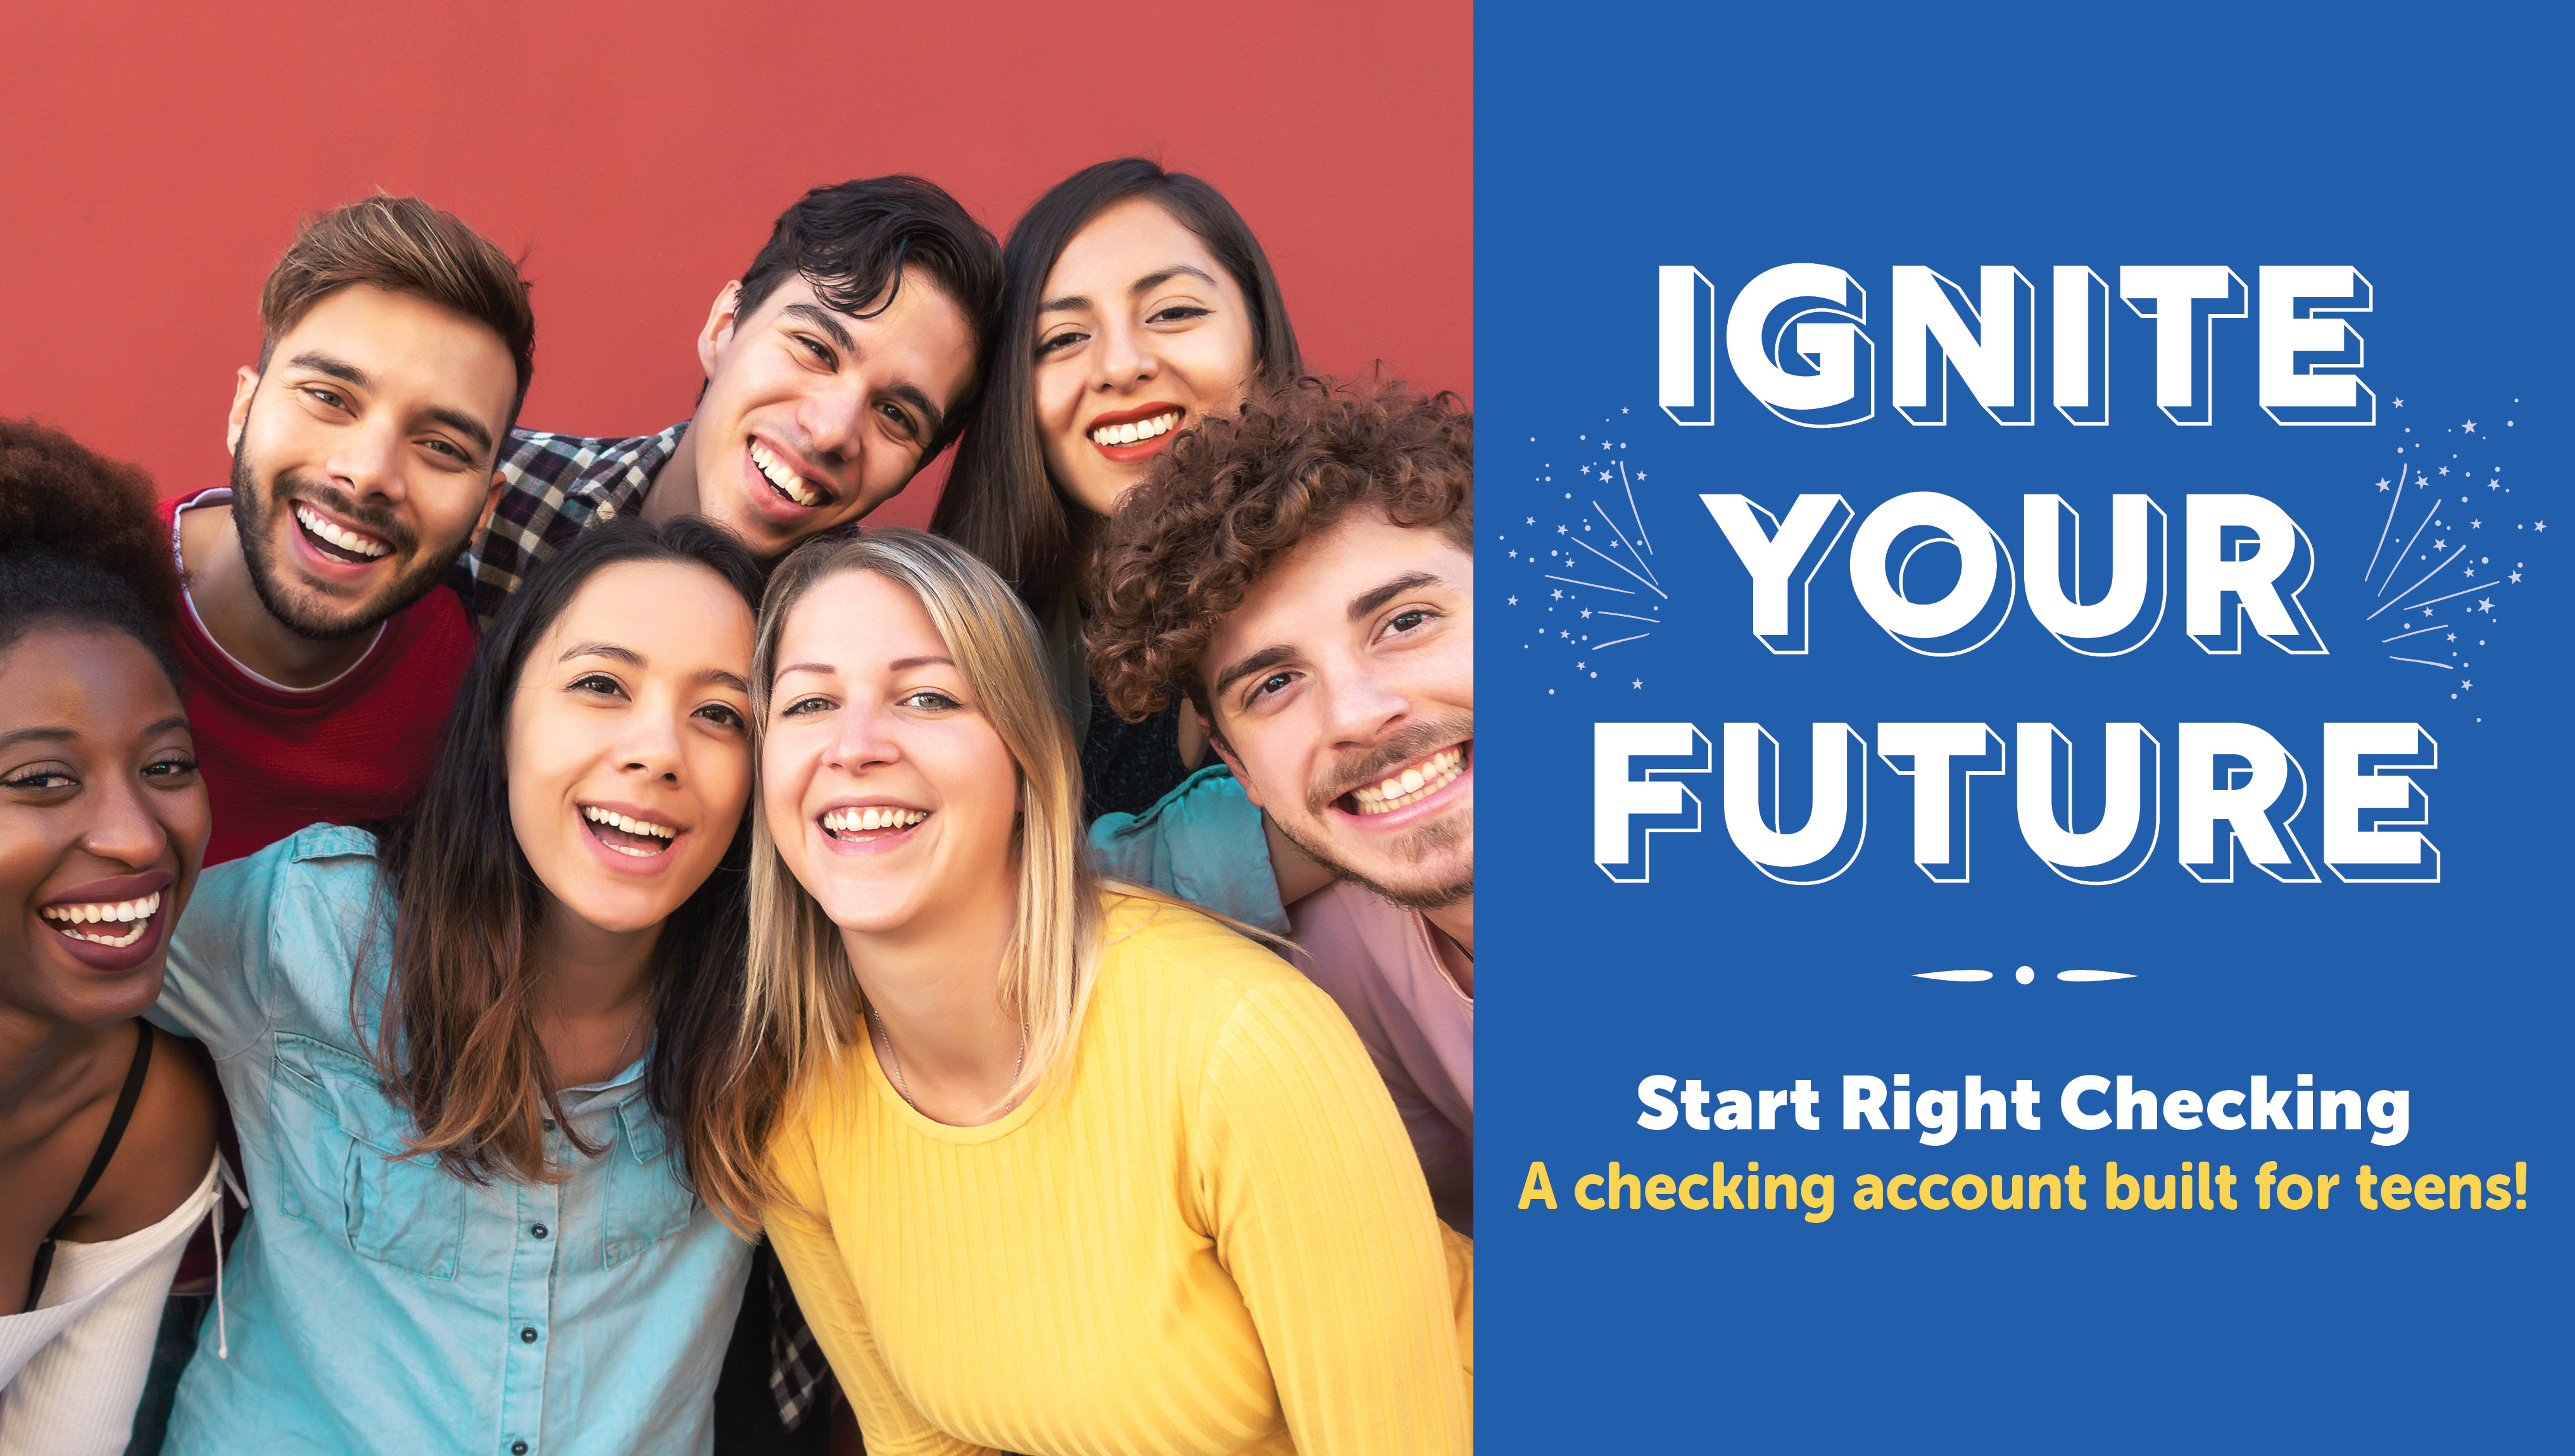 Ignite your future. Start Right Checking. A checking account built for teens